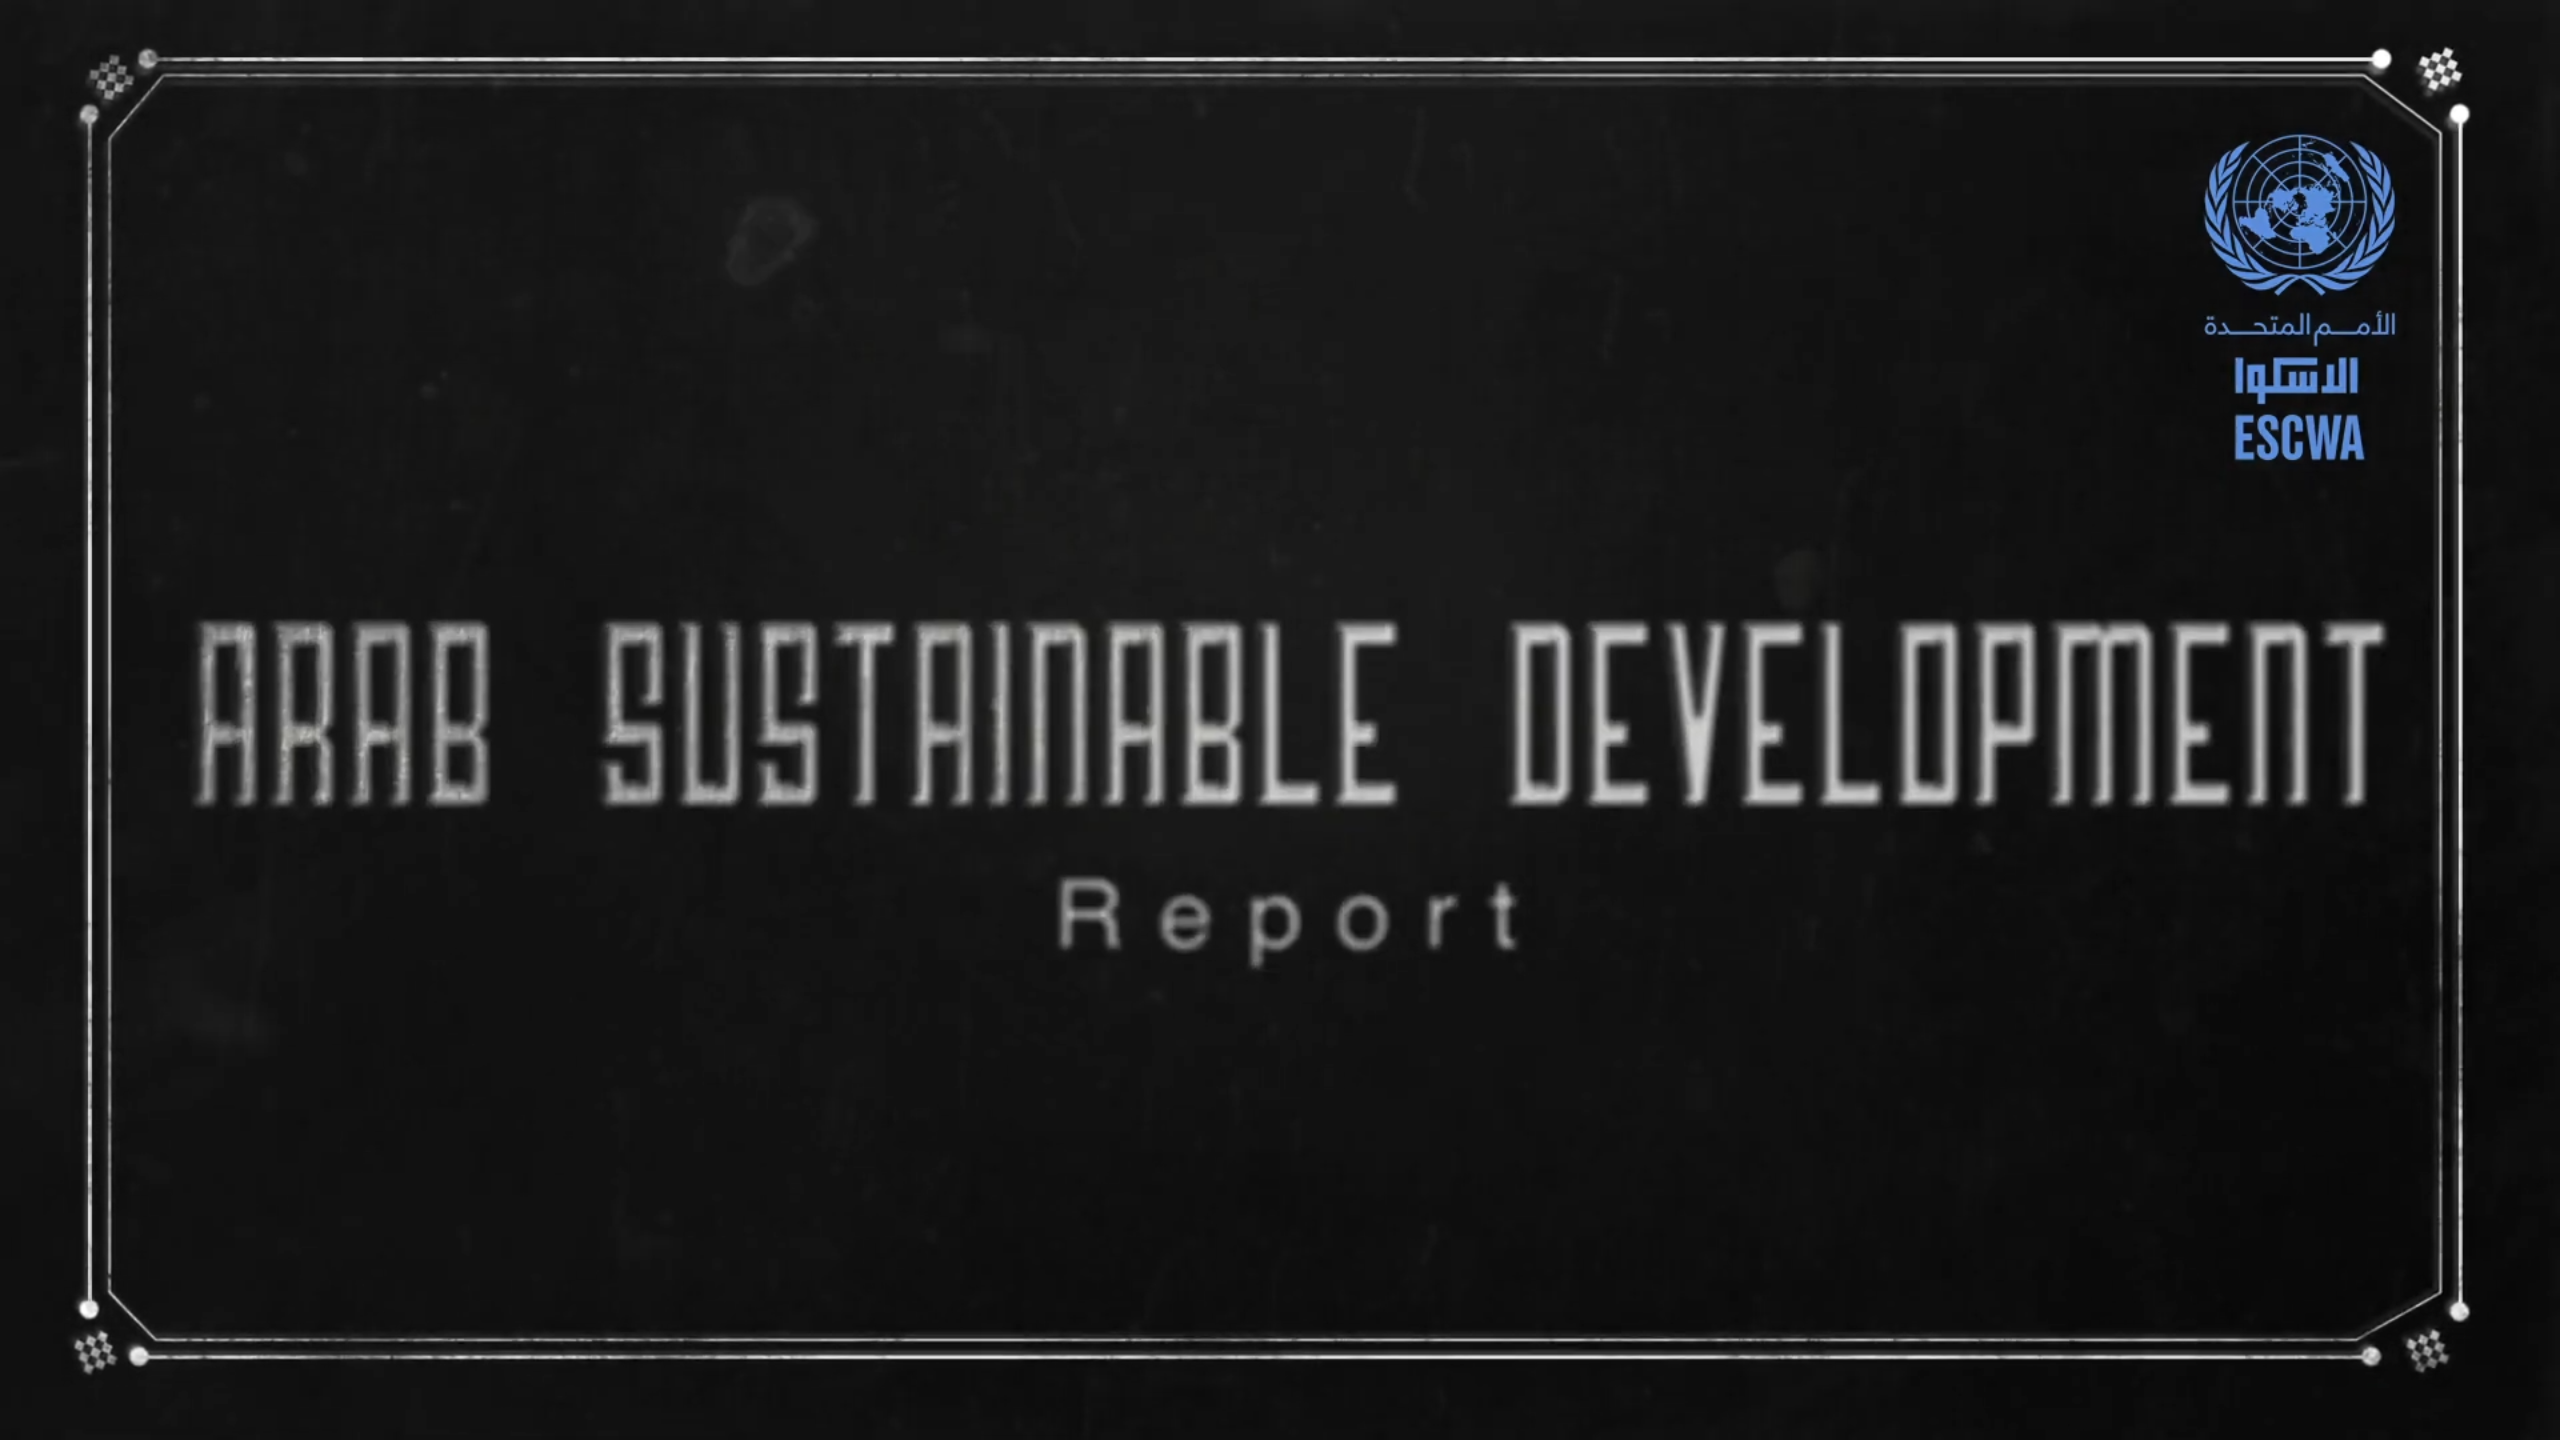 Video of the Arab Sustainable Development Report 2020